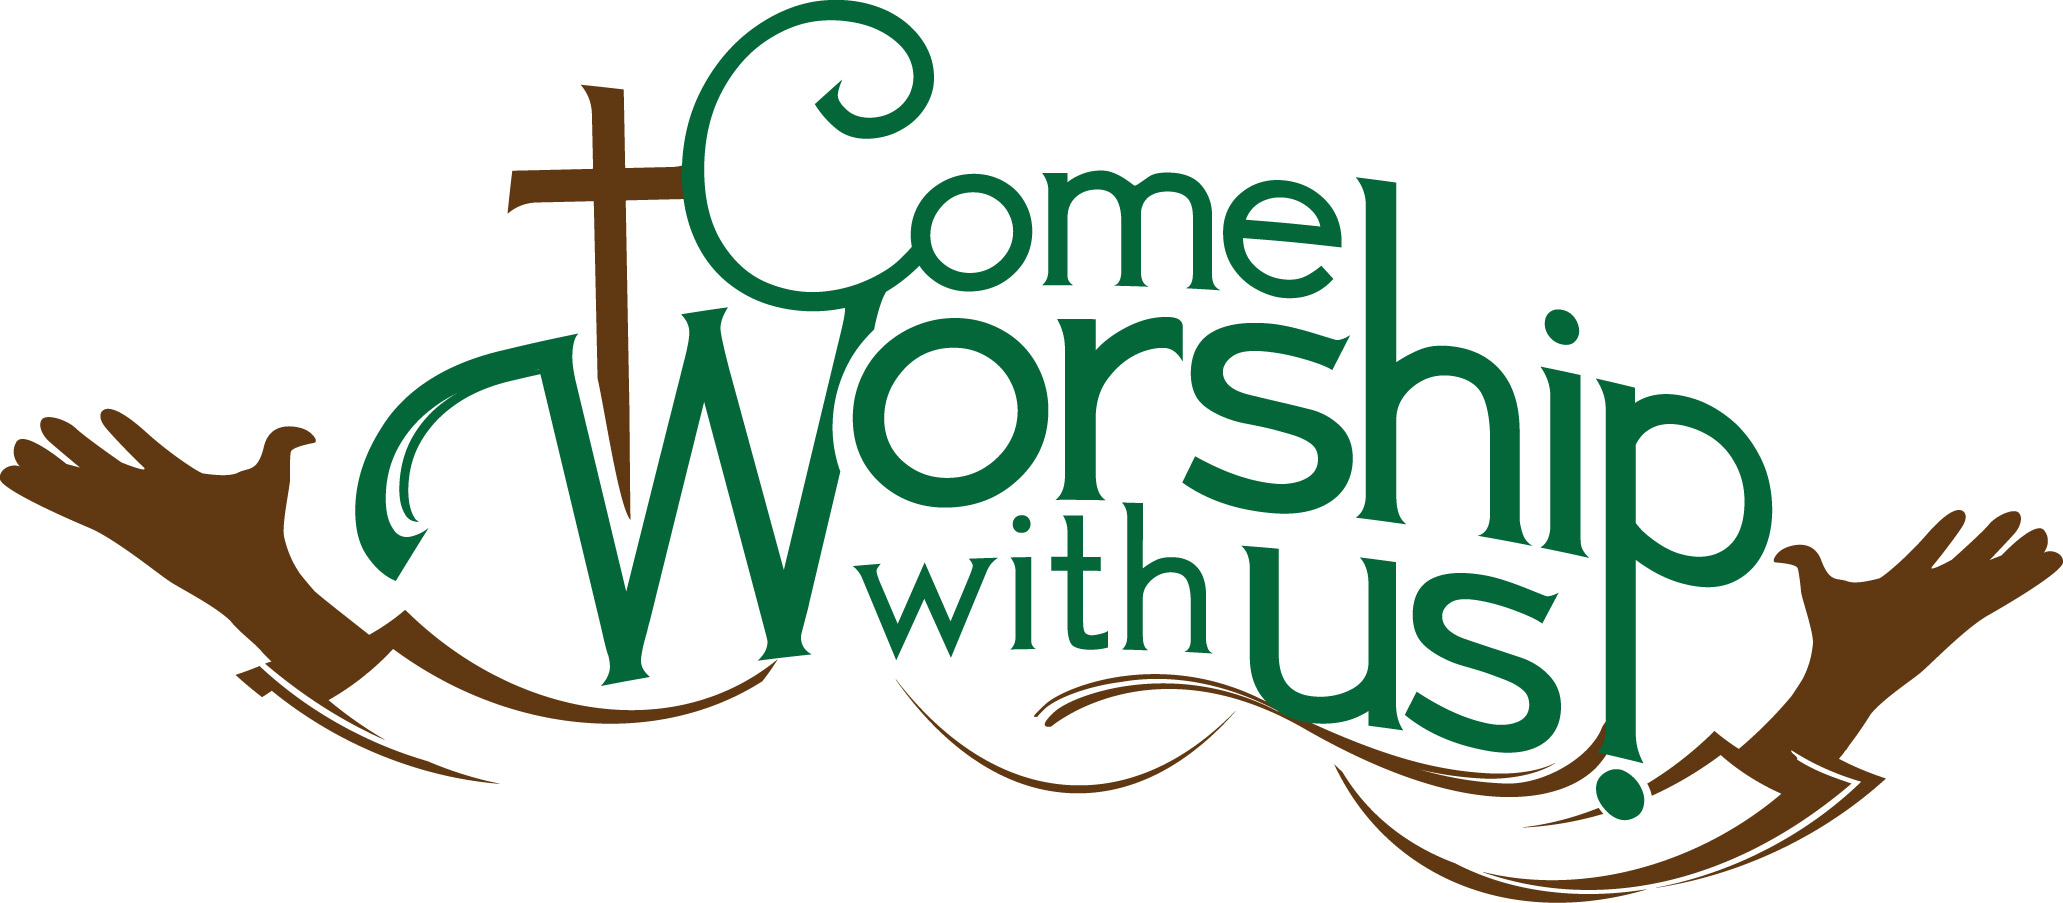 Free Worship Christian Cliparts, Download Free Clip Art